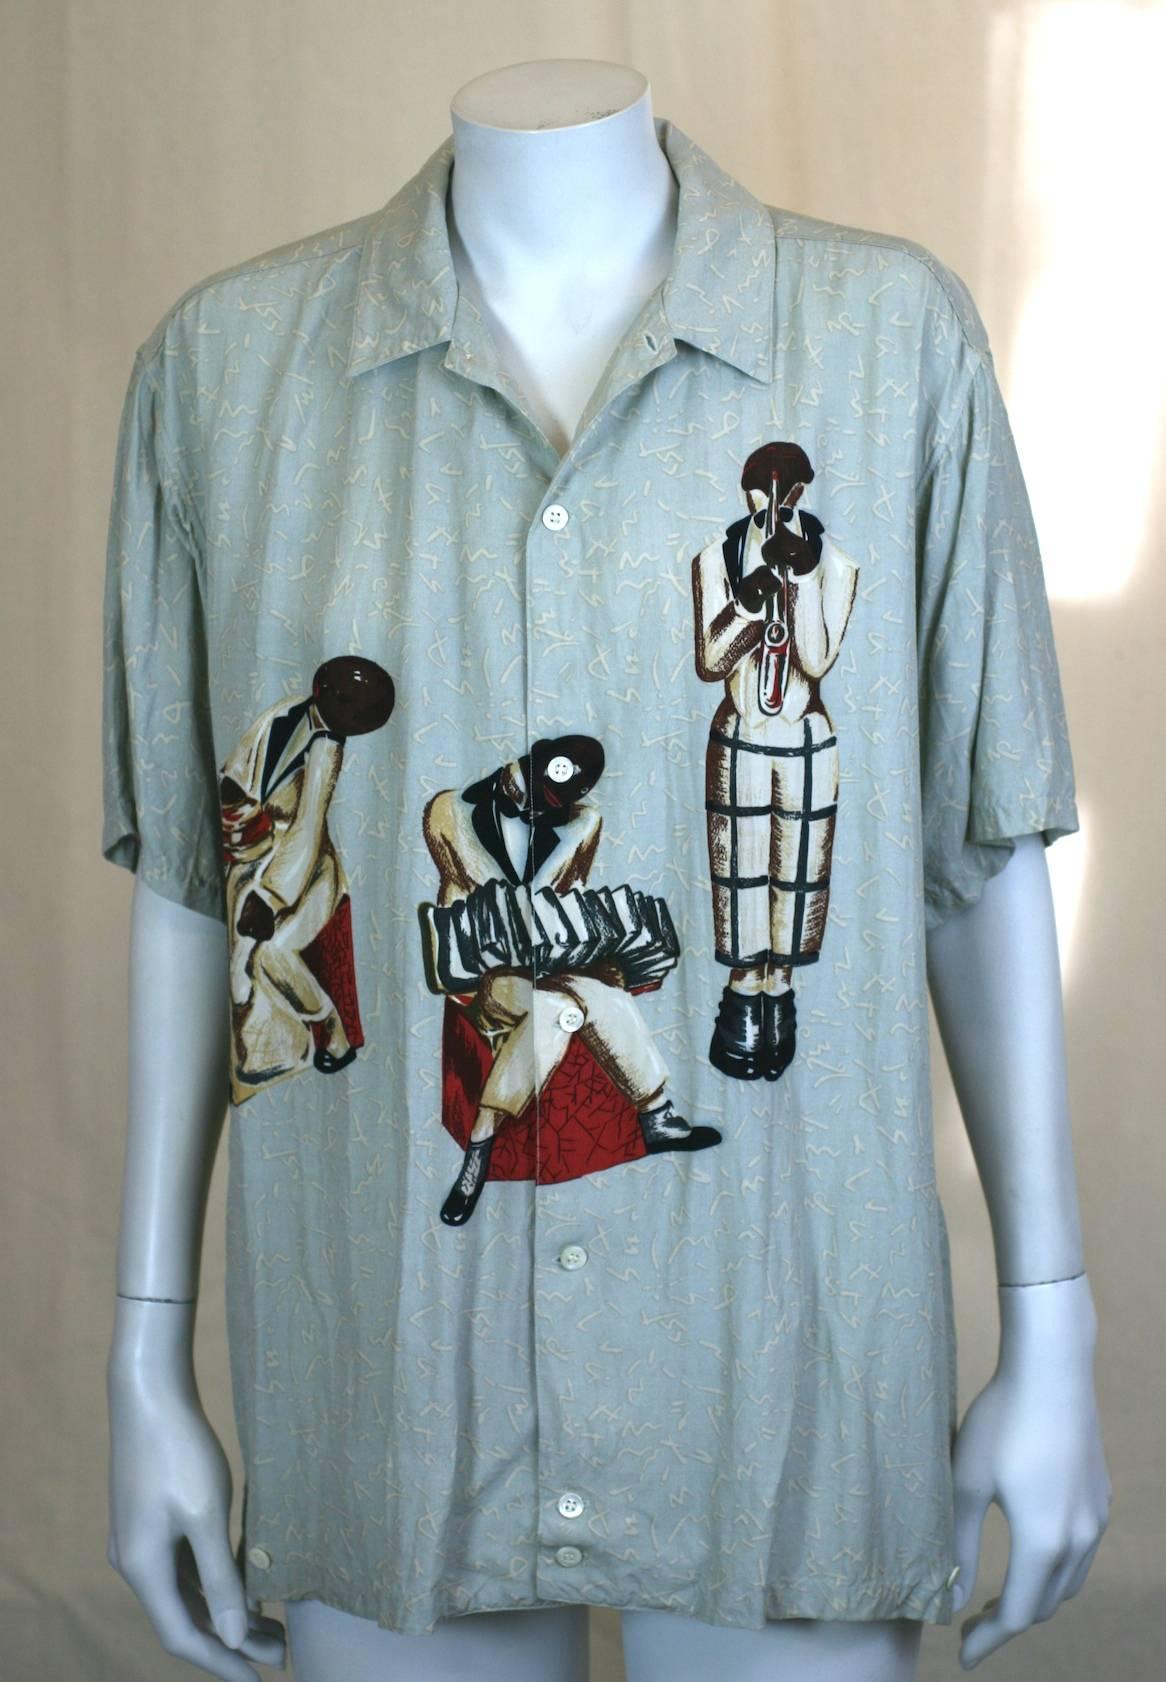 Early mens rayon camp shirt by Takeo Kikuchi for Charivari. Amazing graphics were the hallmark of many of the Japanese mens wear designers of the 1980's. Here a African American Jazz band graphic is depicted in a Deco style on an elongated, squiggle